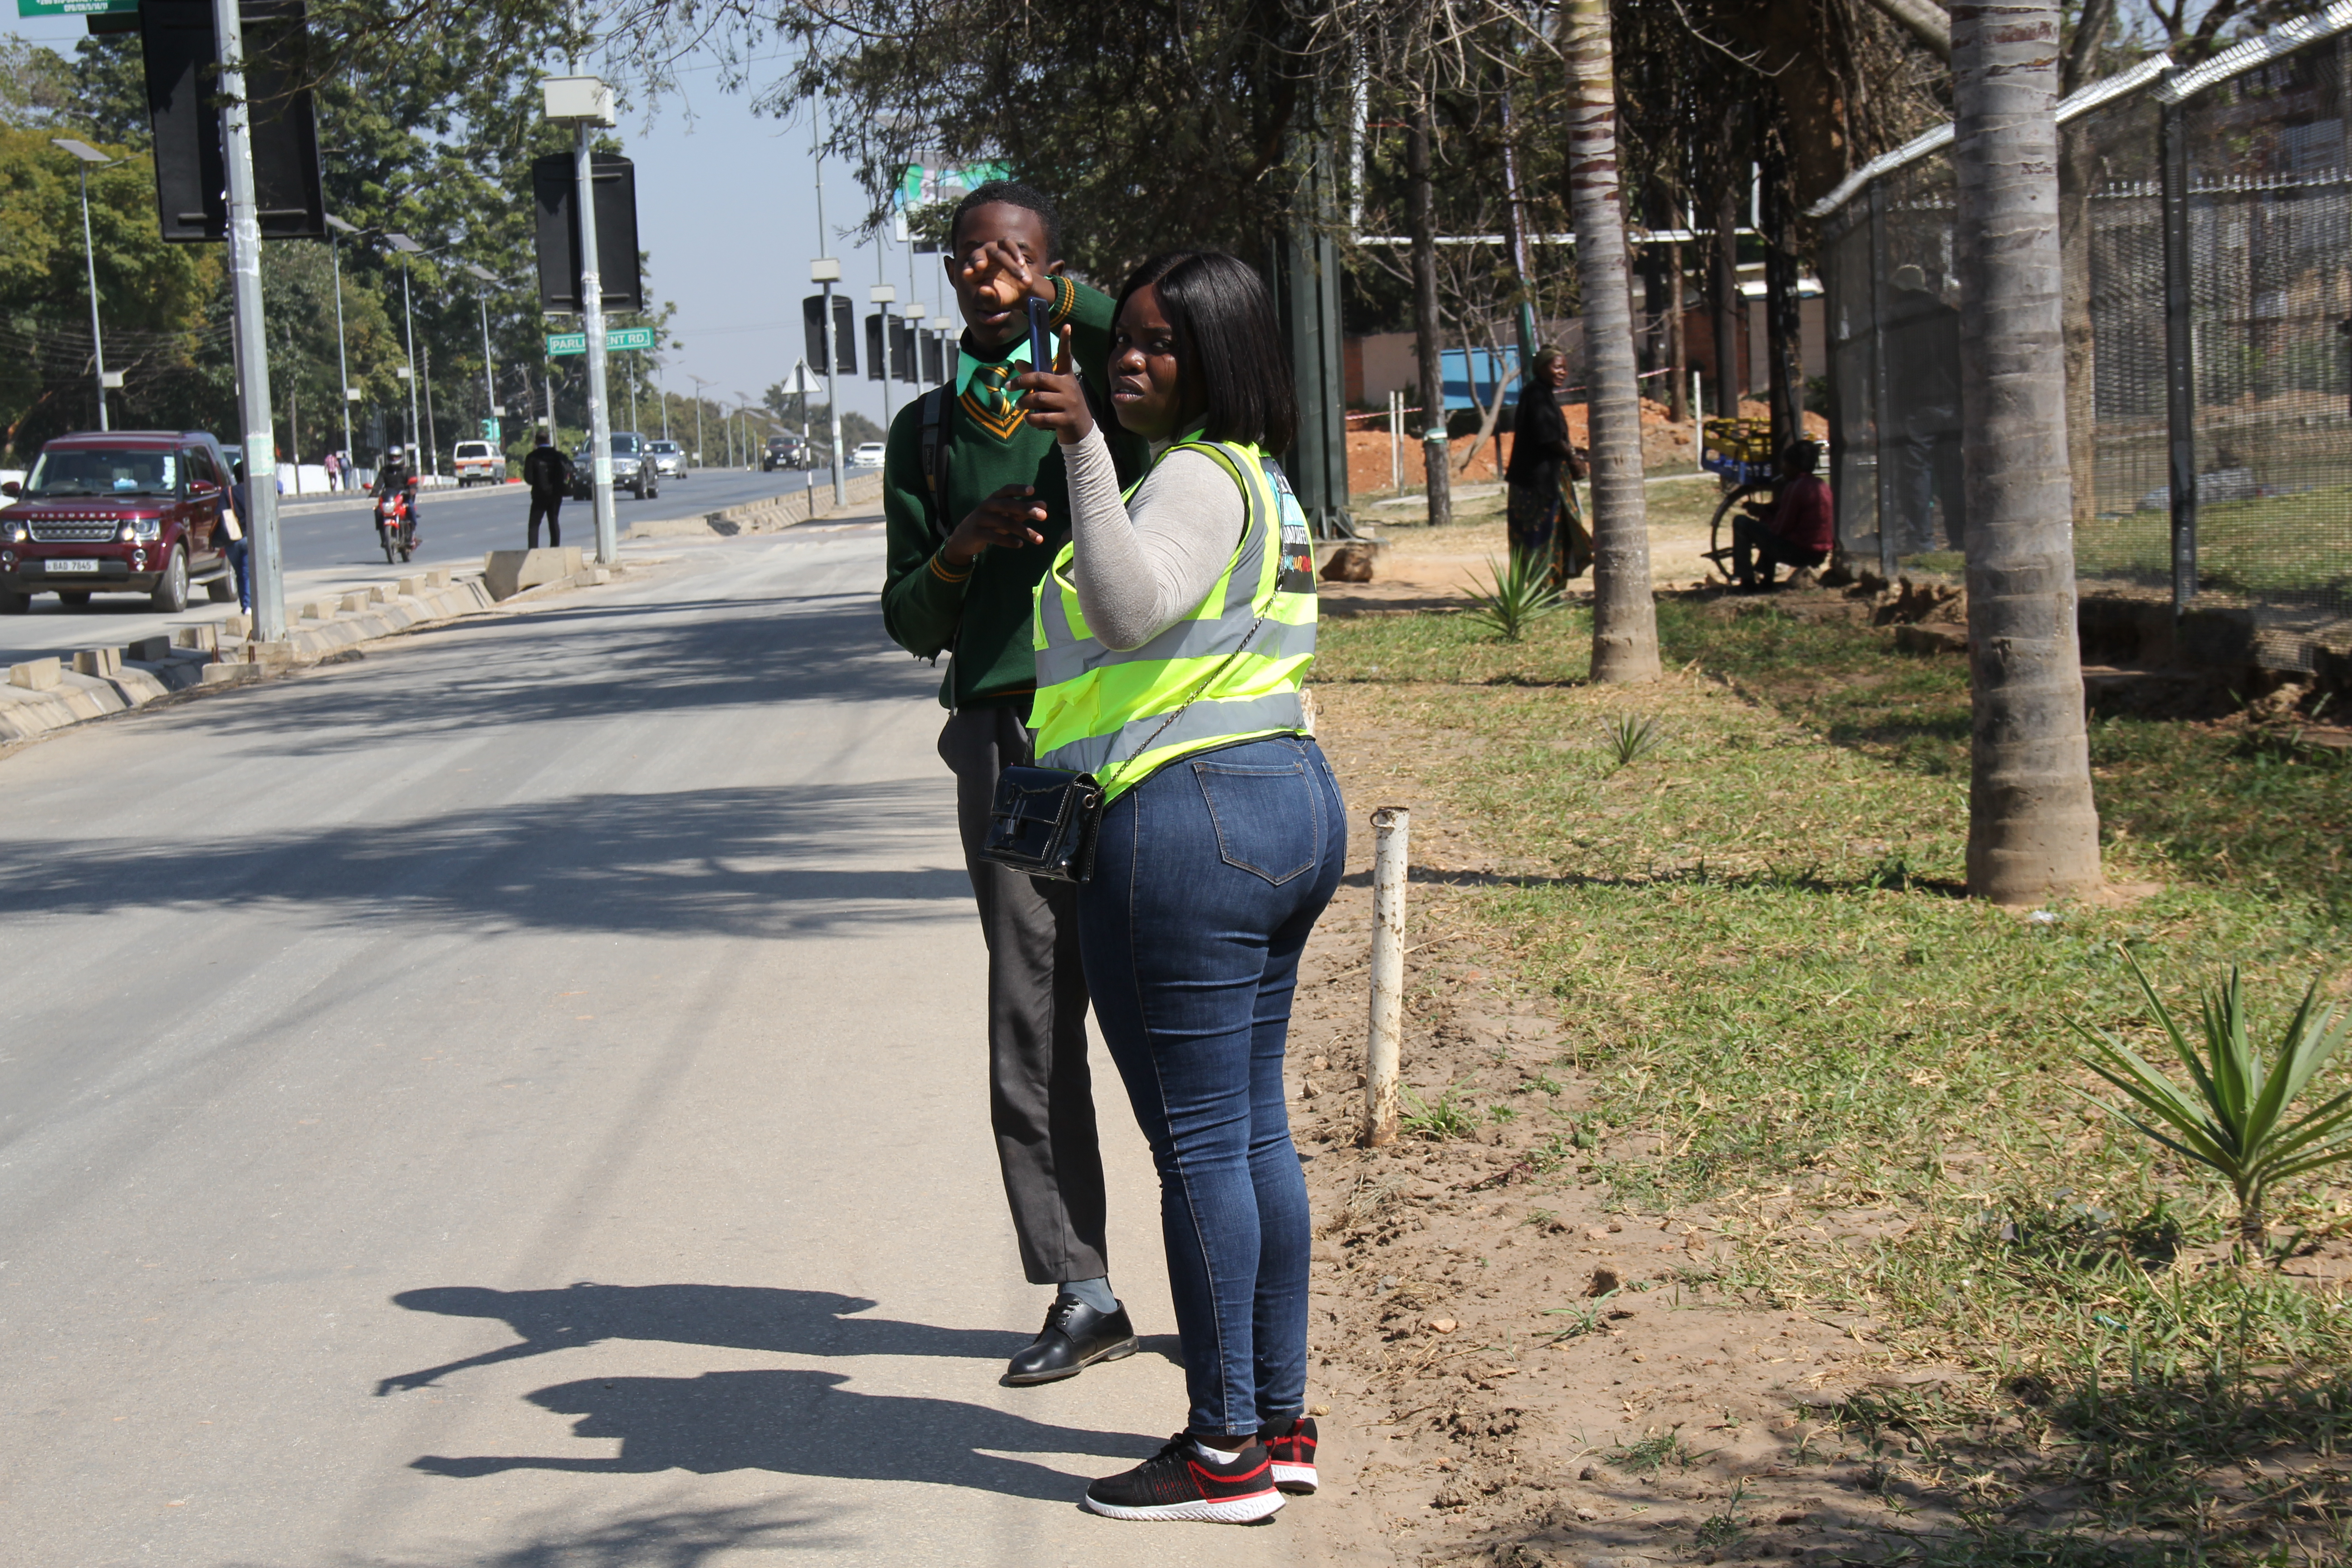 An road agent giving instructions in Lusaka, Zambia.